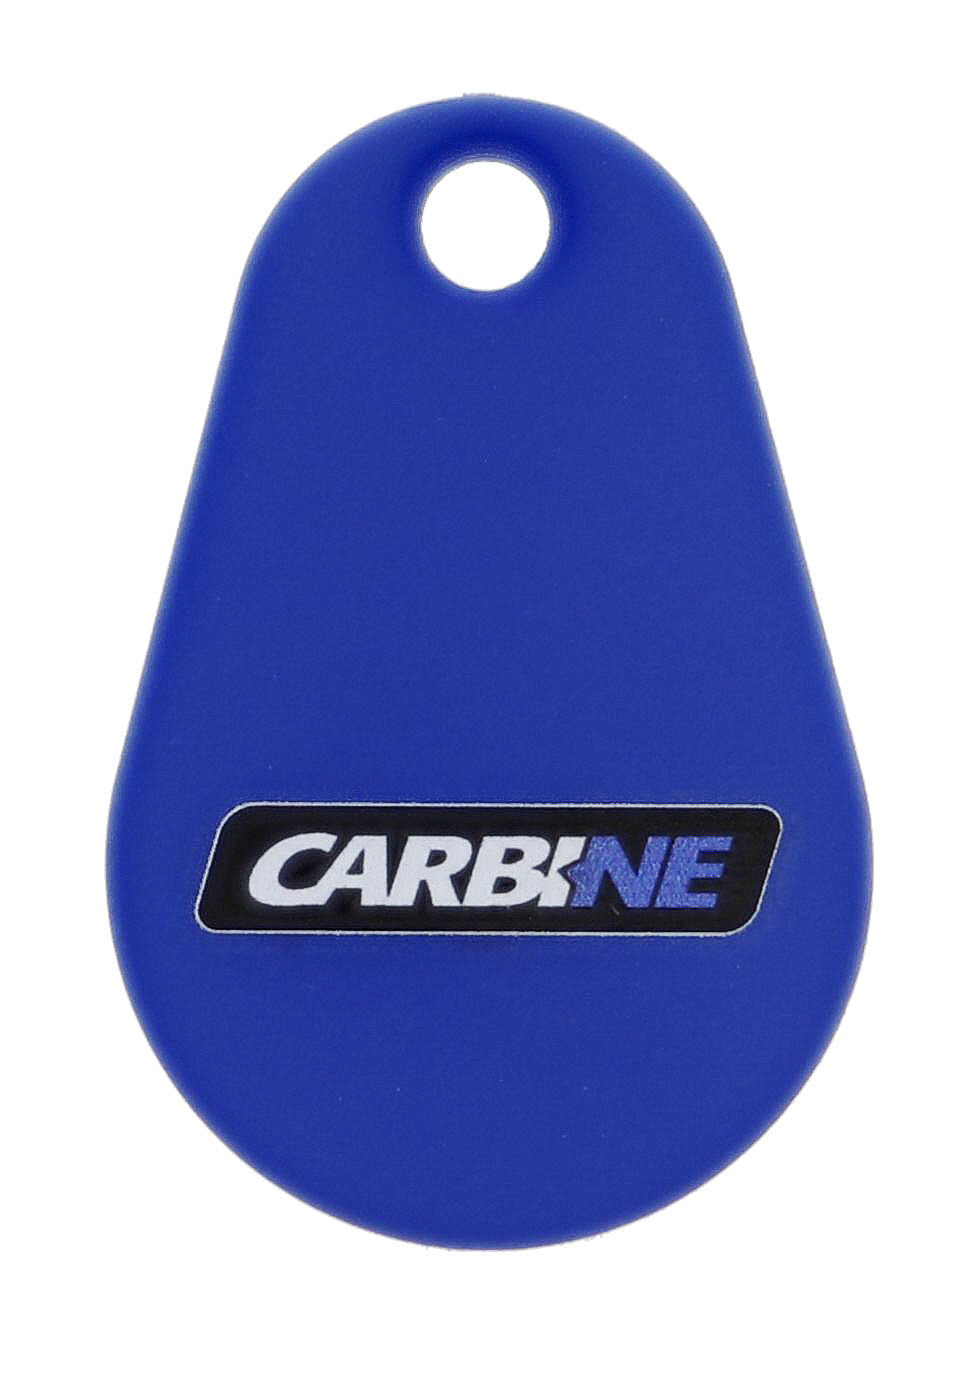 Carbine CEL-3IN1 Electronic Lock RFID Fob, Blue